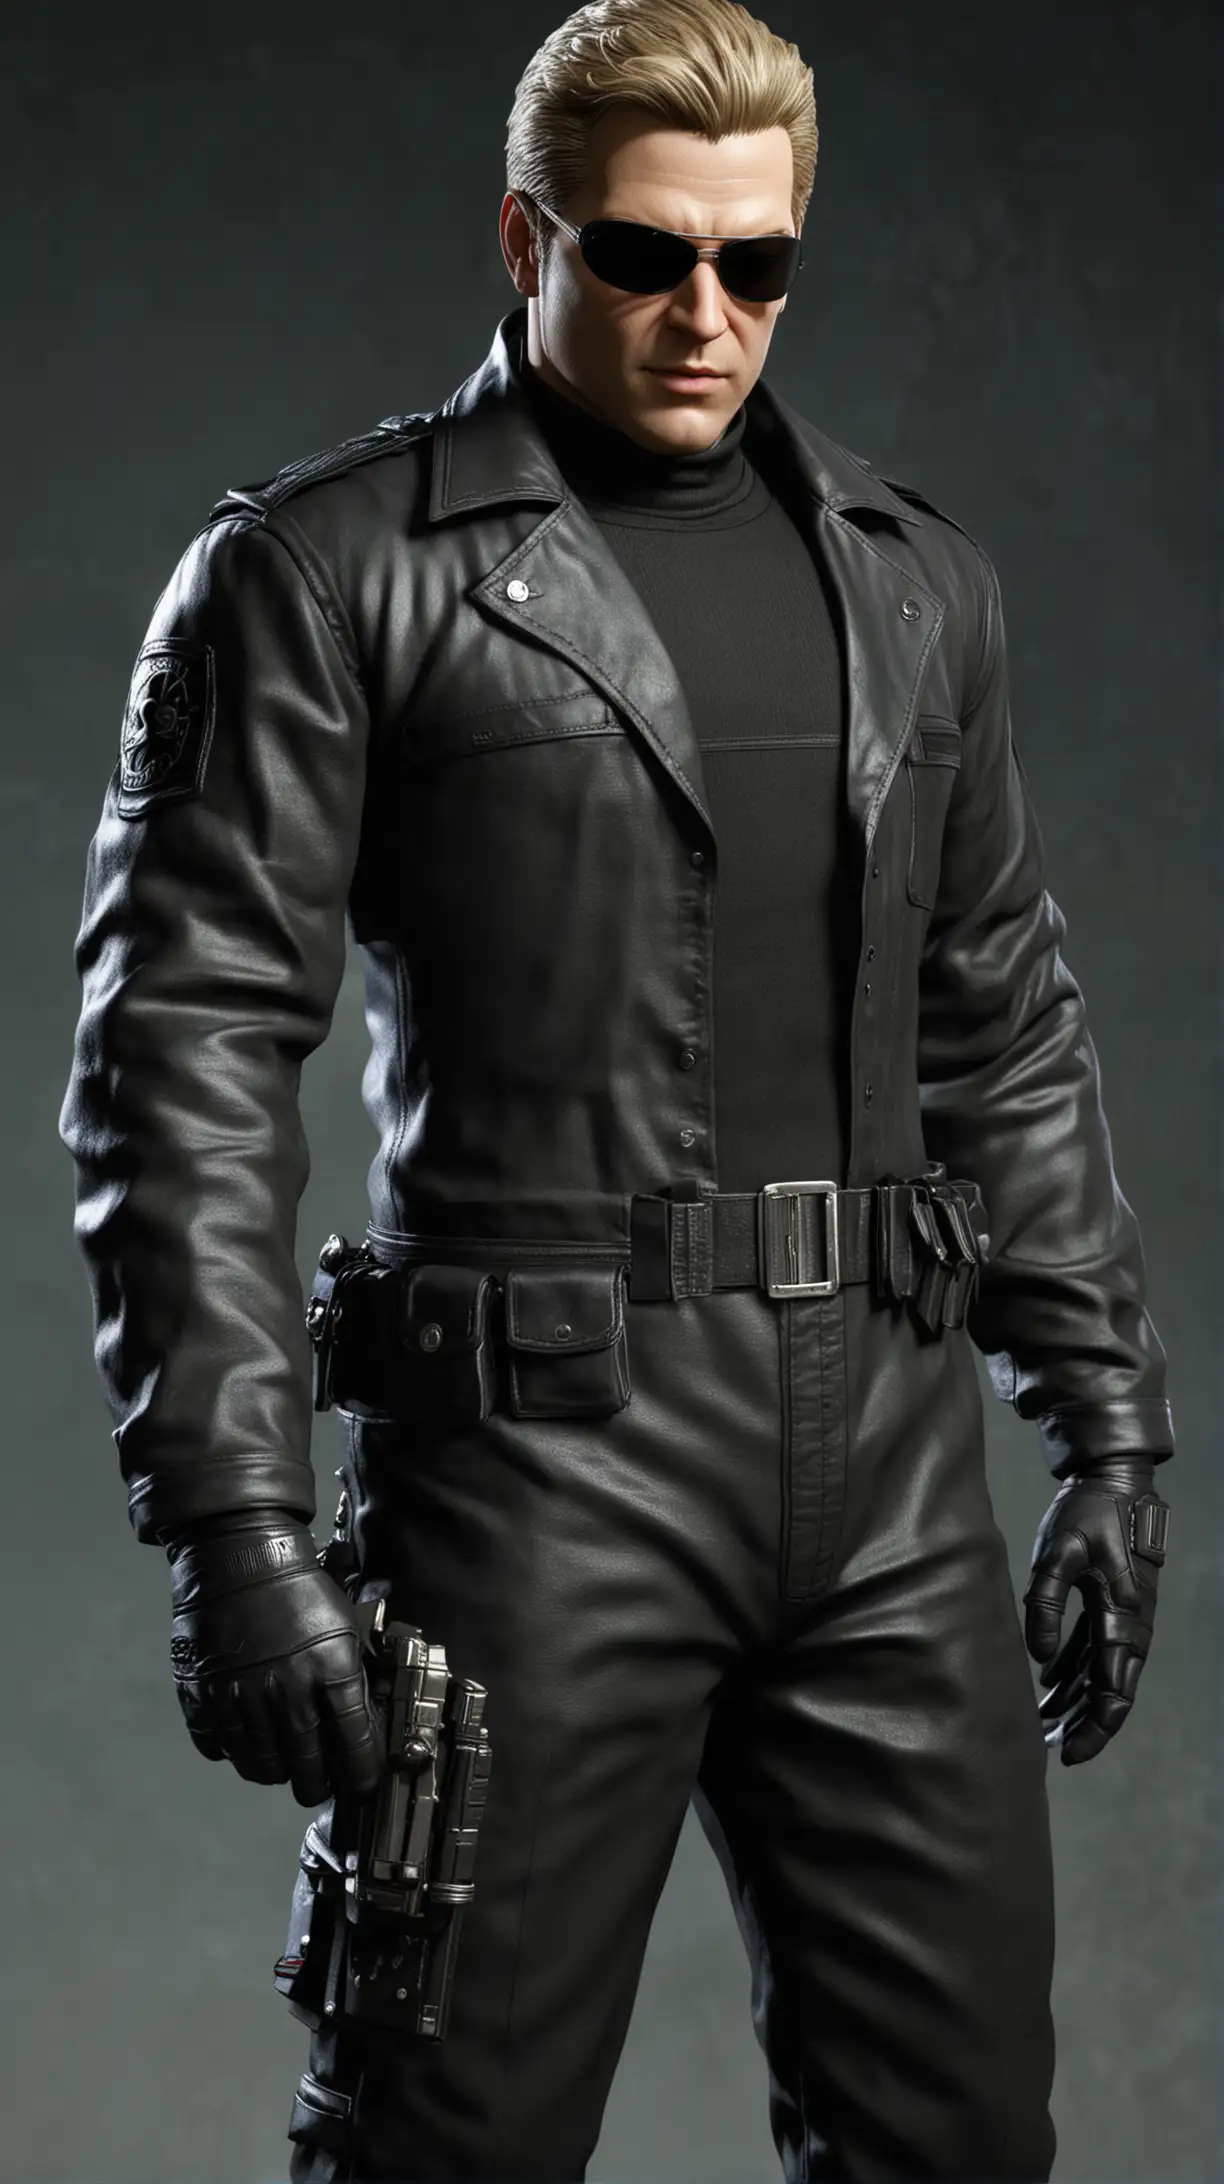 Resident Evil
Albert Wesker
all-black outfit and sunglasses